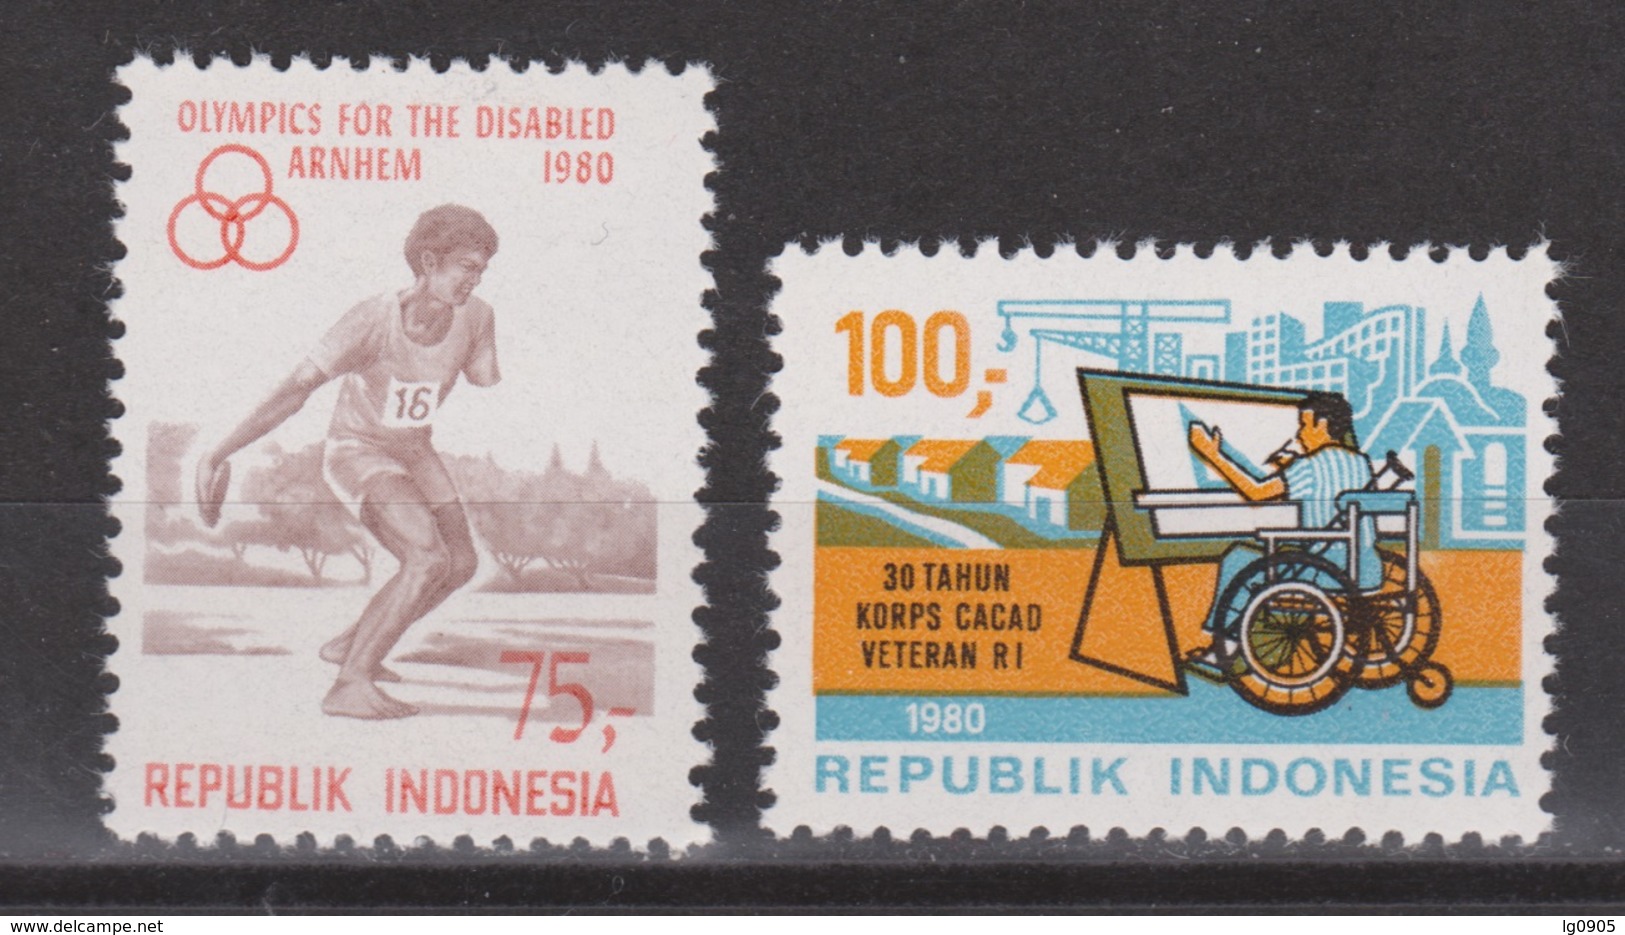 Indonesie 1003-1004 MNH ; Olympic Games Handicapped Persons Arnhem 1980 NOW MANY STAMPS INDONESIA VERY CHEAP - Sport Voor Mindervaliden